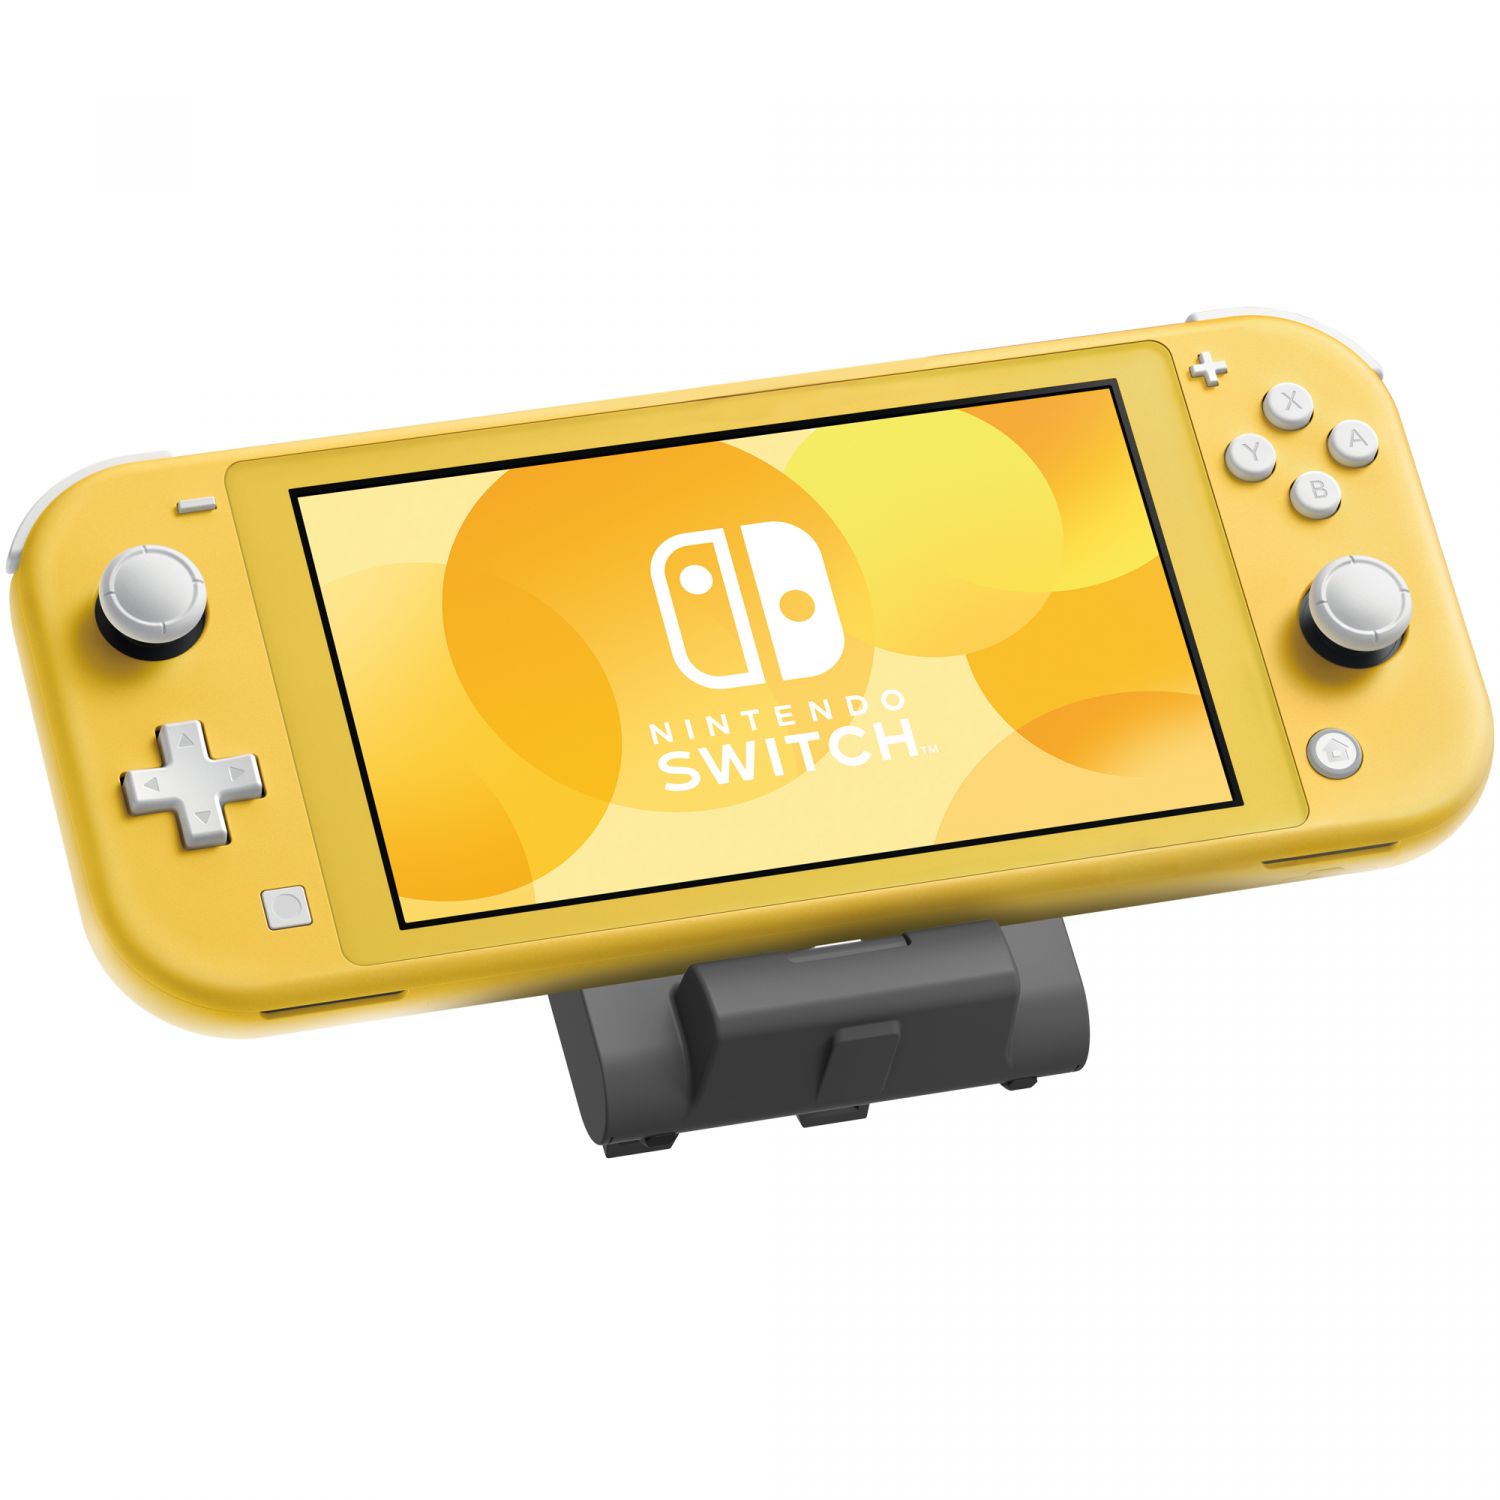 dual usb playstand for nintendo switch lite